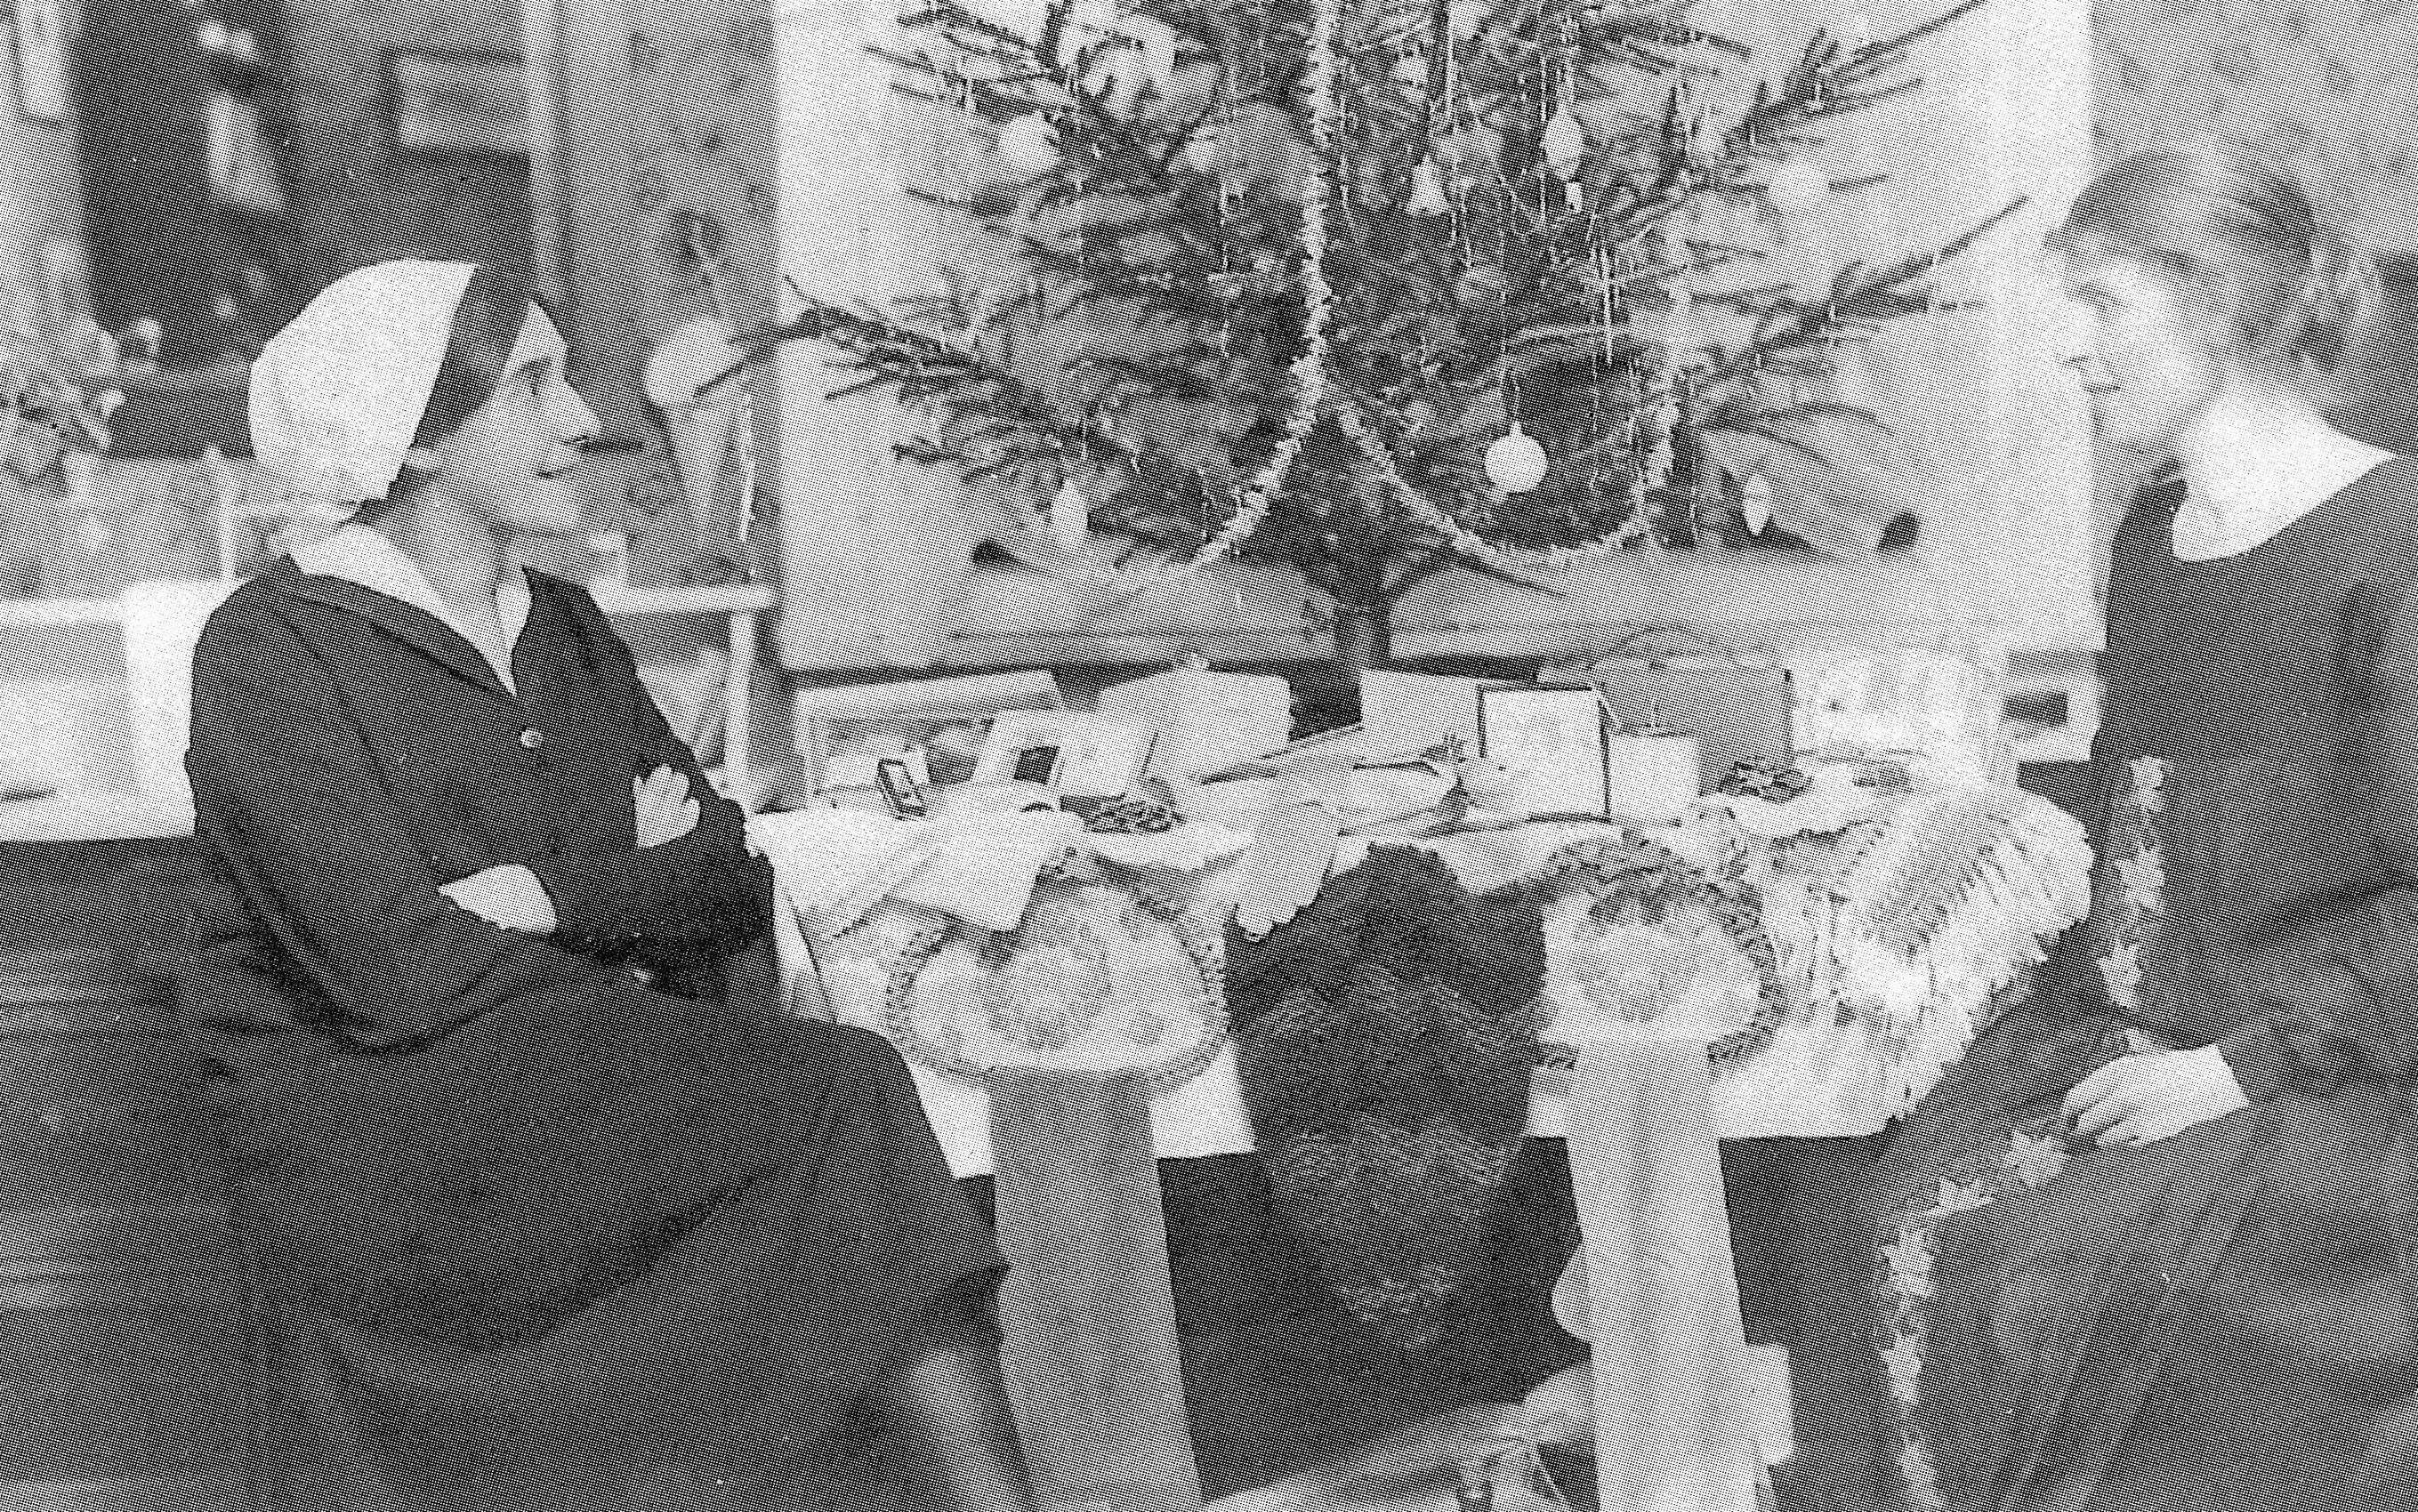 Bettina Falk (right) with her sister Emilie Falk